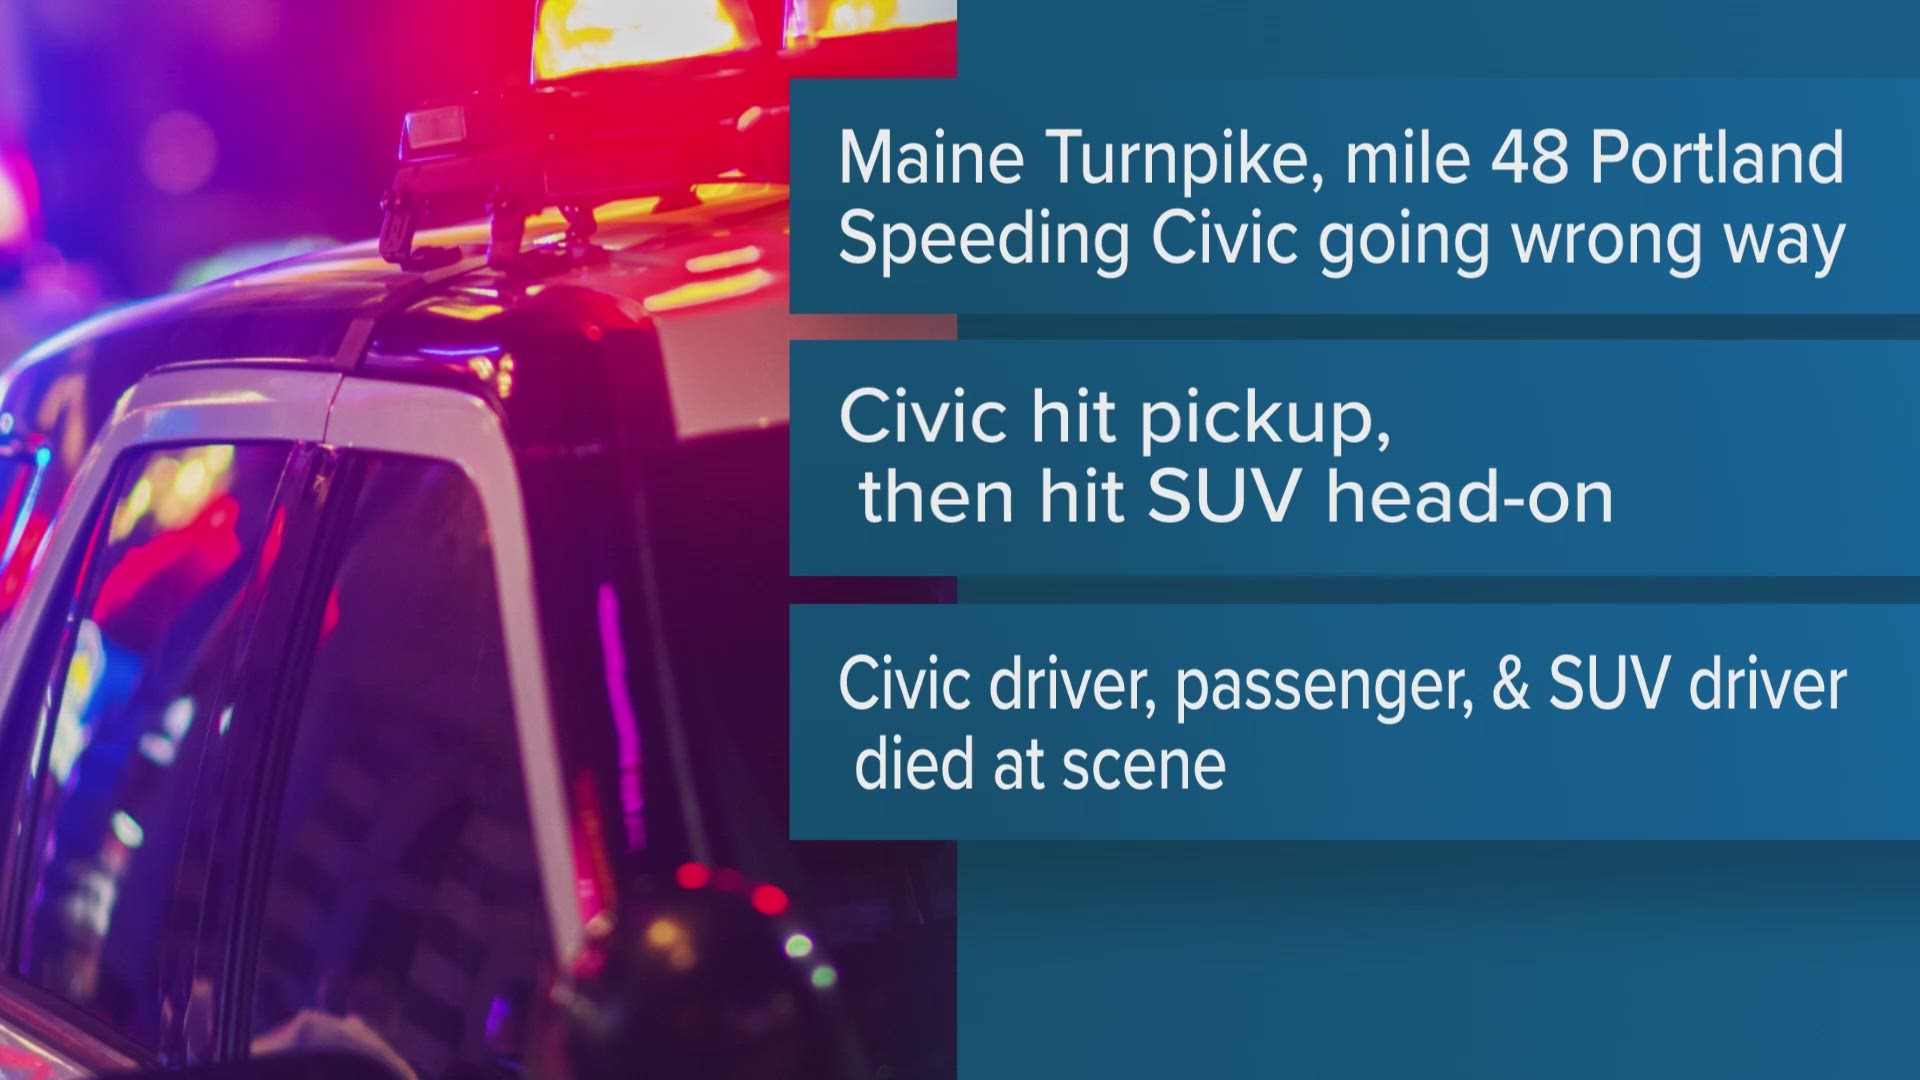 The driver and passenger in the wrong-way vehicle died, as well as the driver of the vehicle that was struck, according to the Maine Dept. of Public Safety.